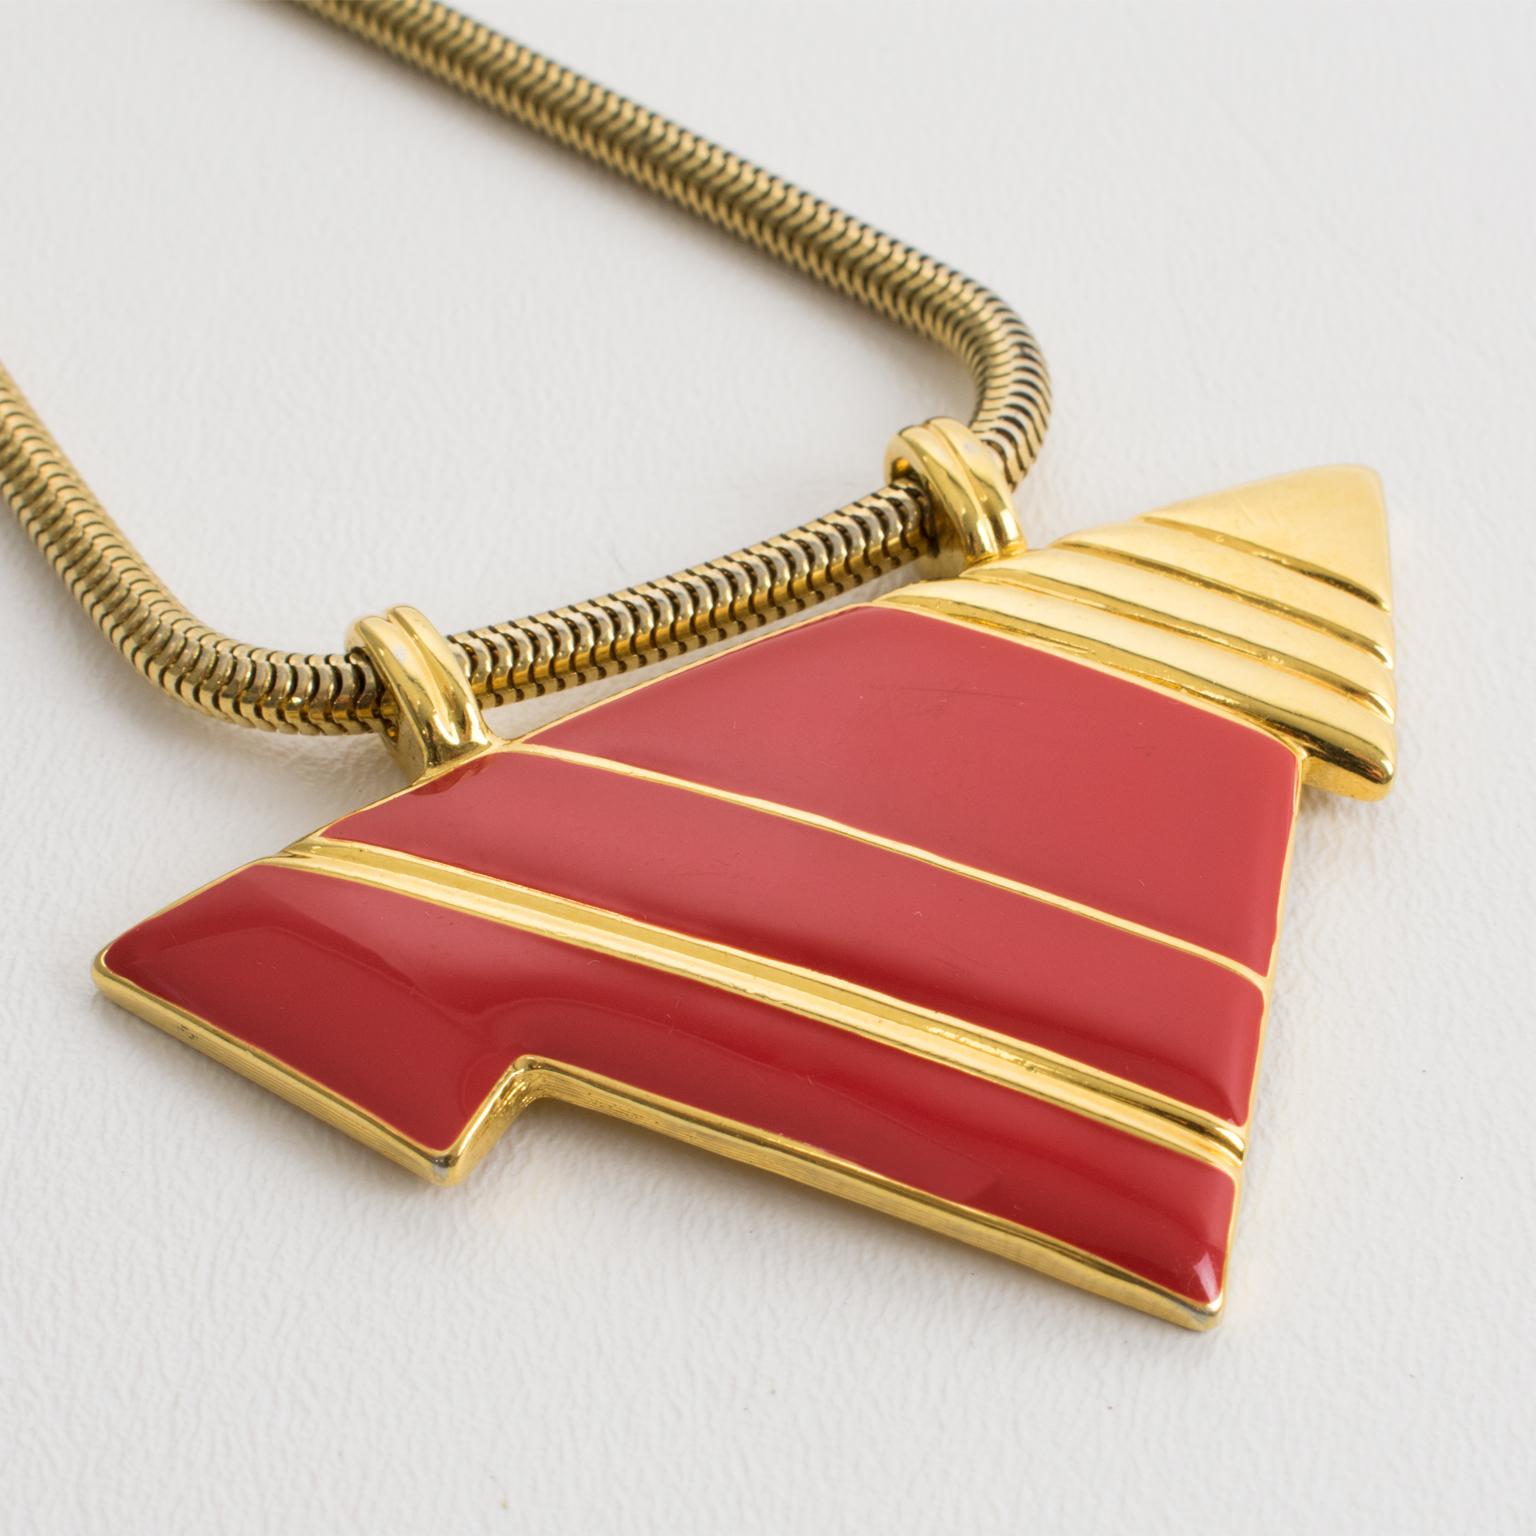 Lanvin Paris Geometric Necklace Gilt Metal and Red Enamel In Excellent Condition For Sale In Atlanta, GA